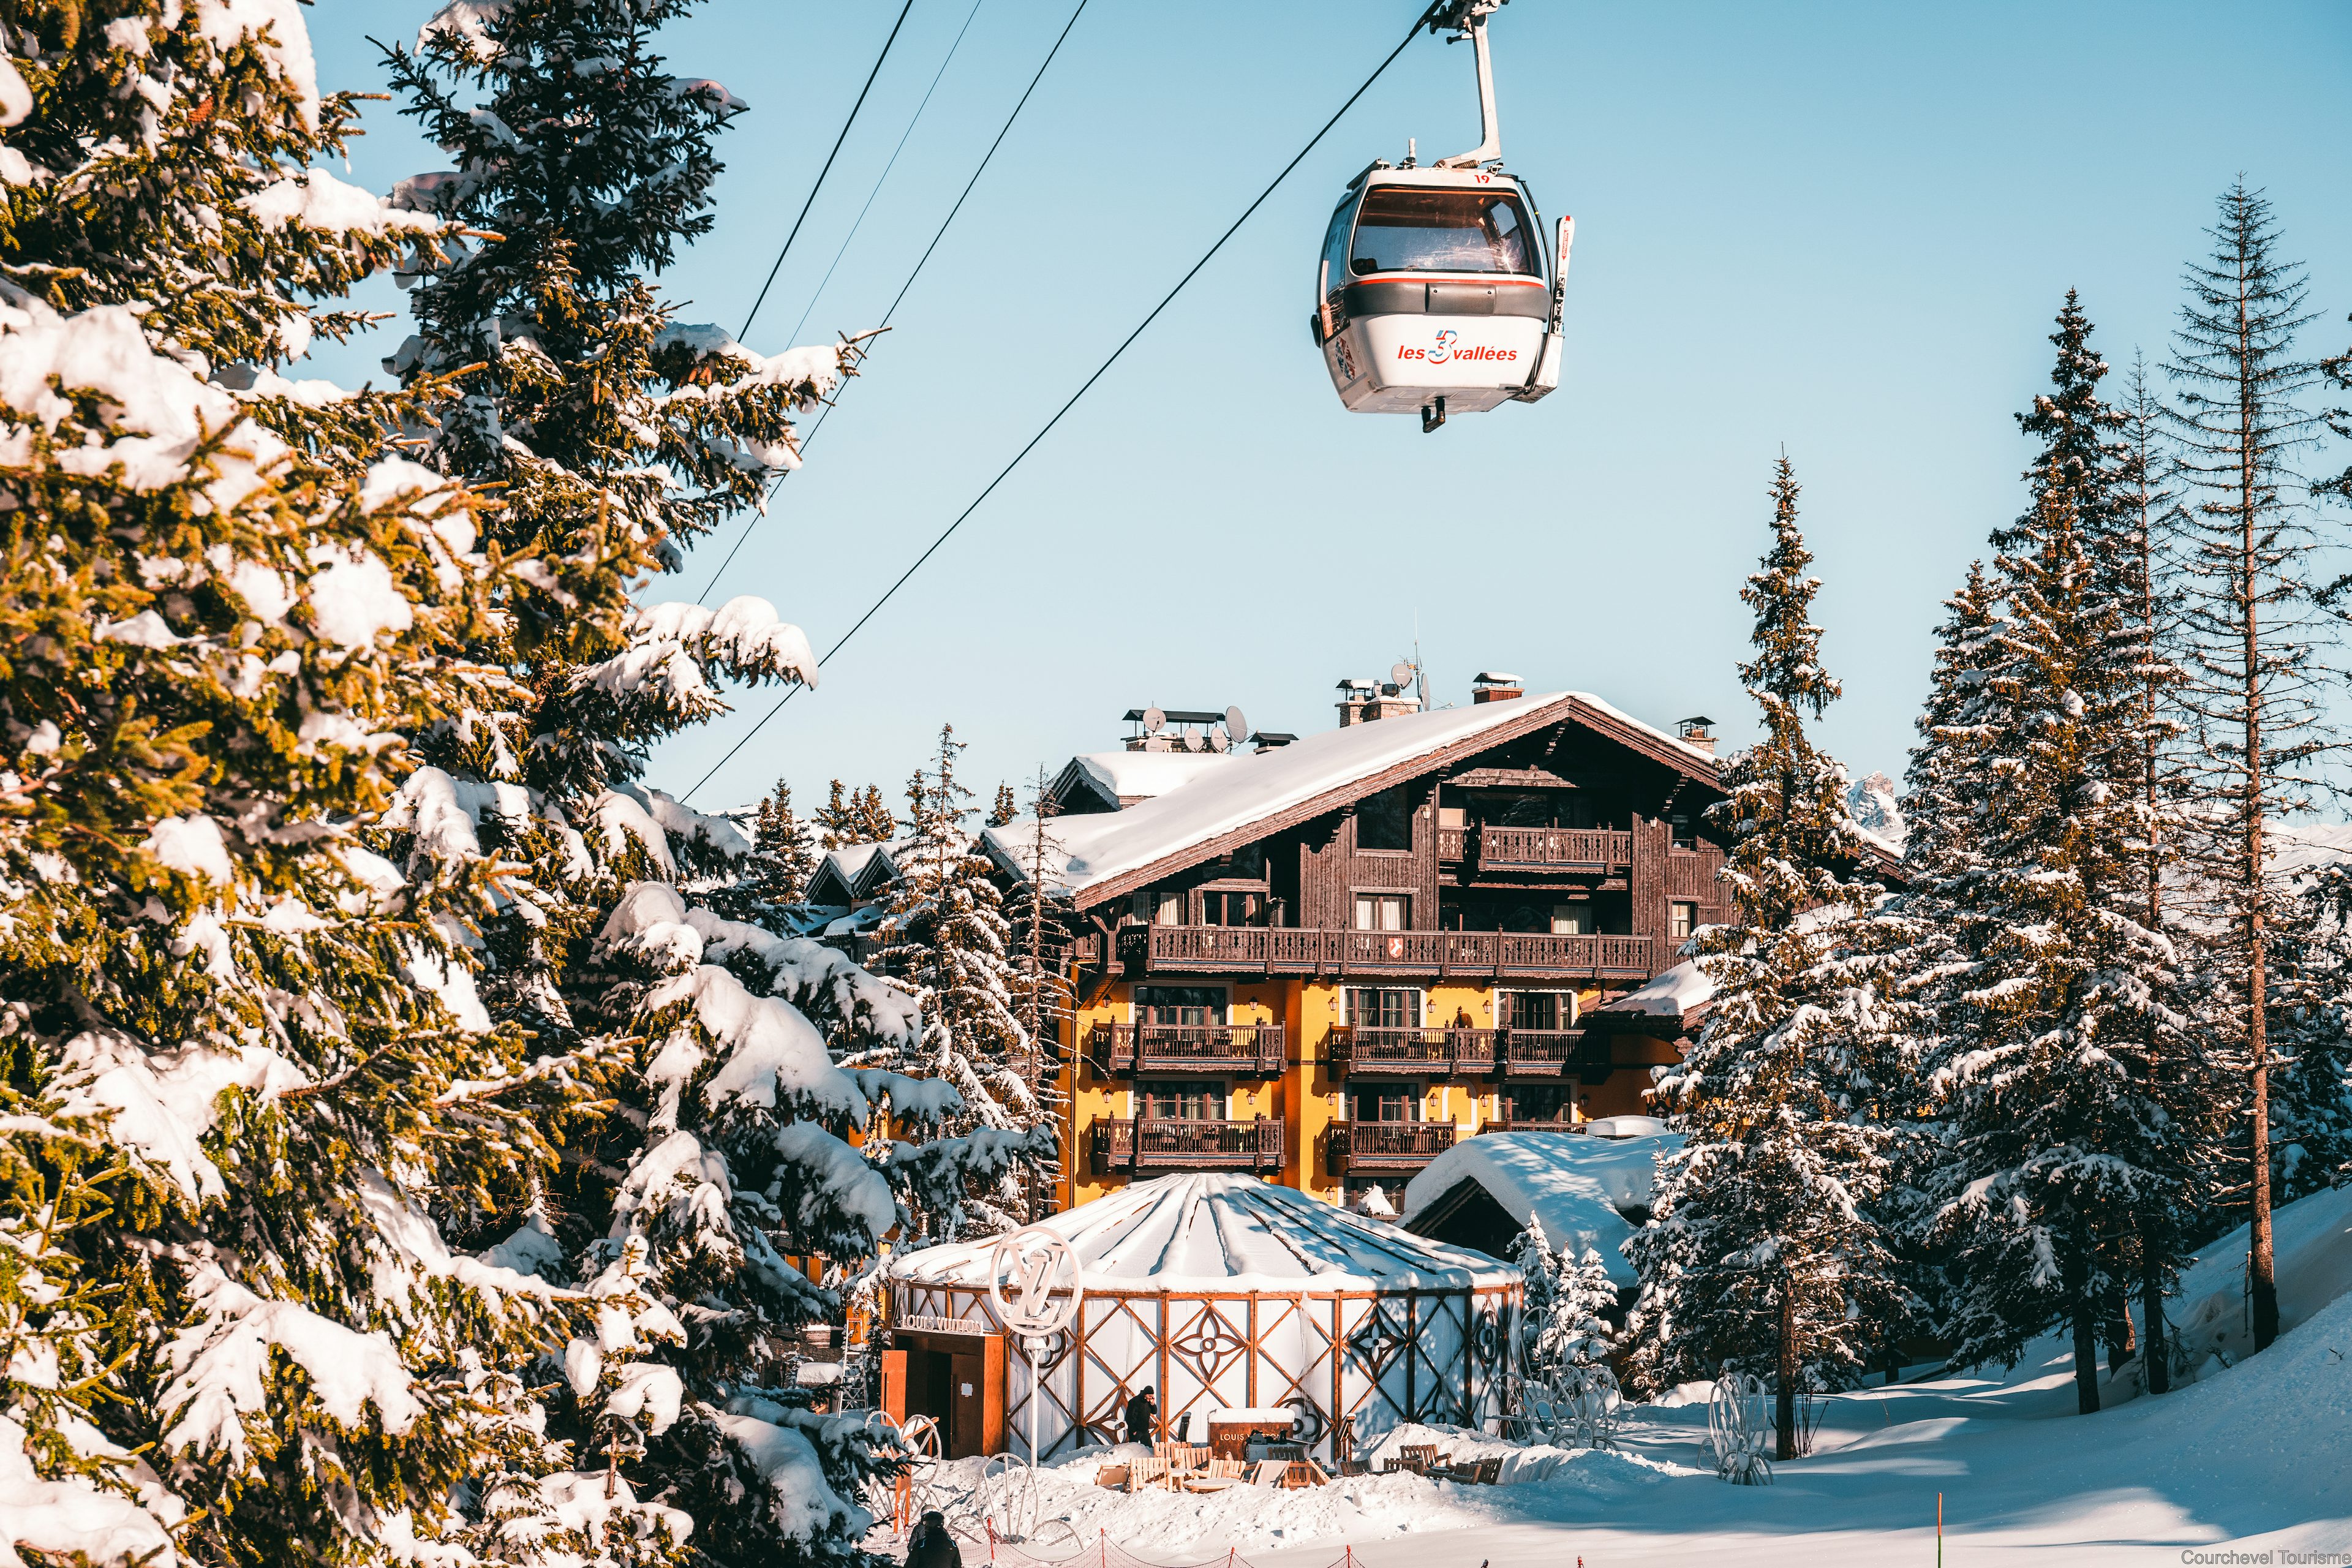 When to Choose Glamorous Courchevel, France Ski Resort for Your French Alps Adventure